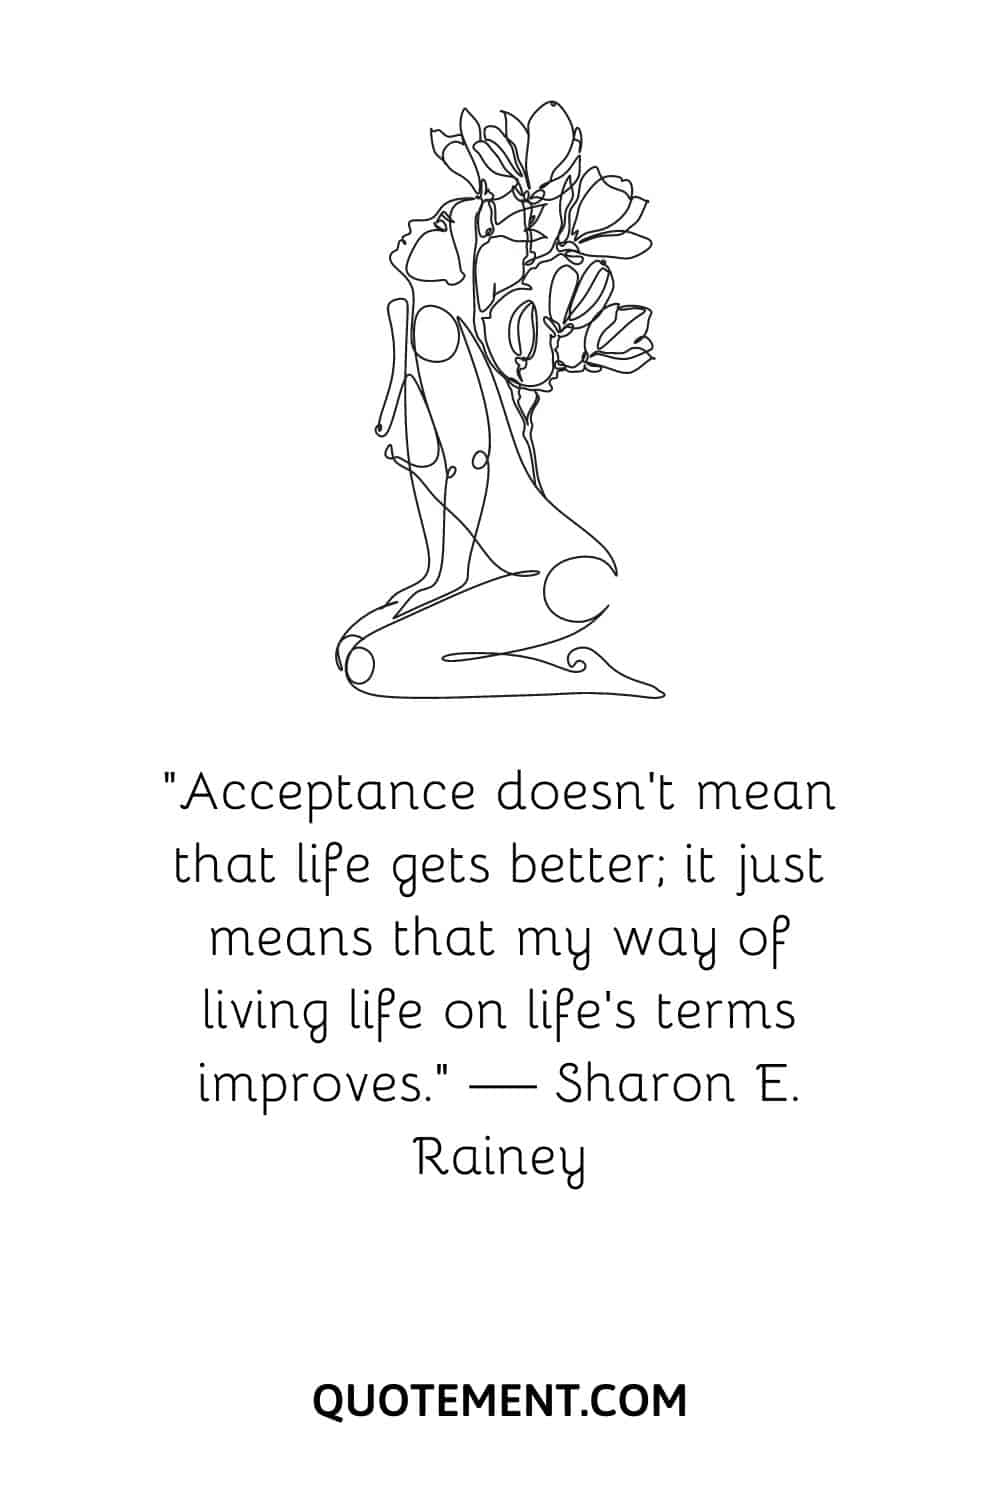 “Acceptance doesn’t mean that life gets better; it just means that my way of living life on life’s terms improves.” — Sharon E. Rainey